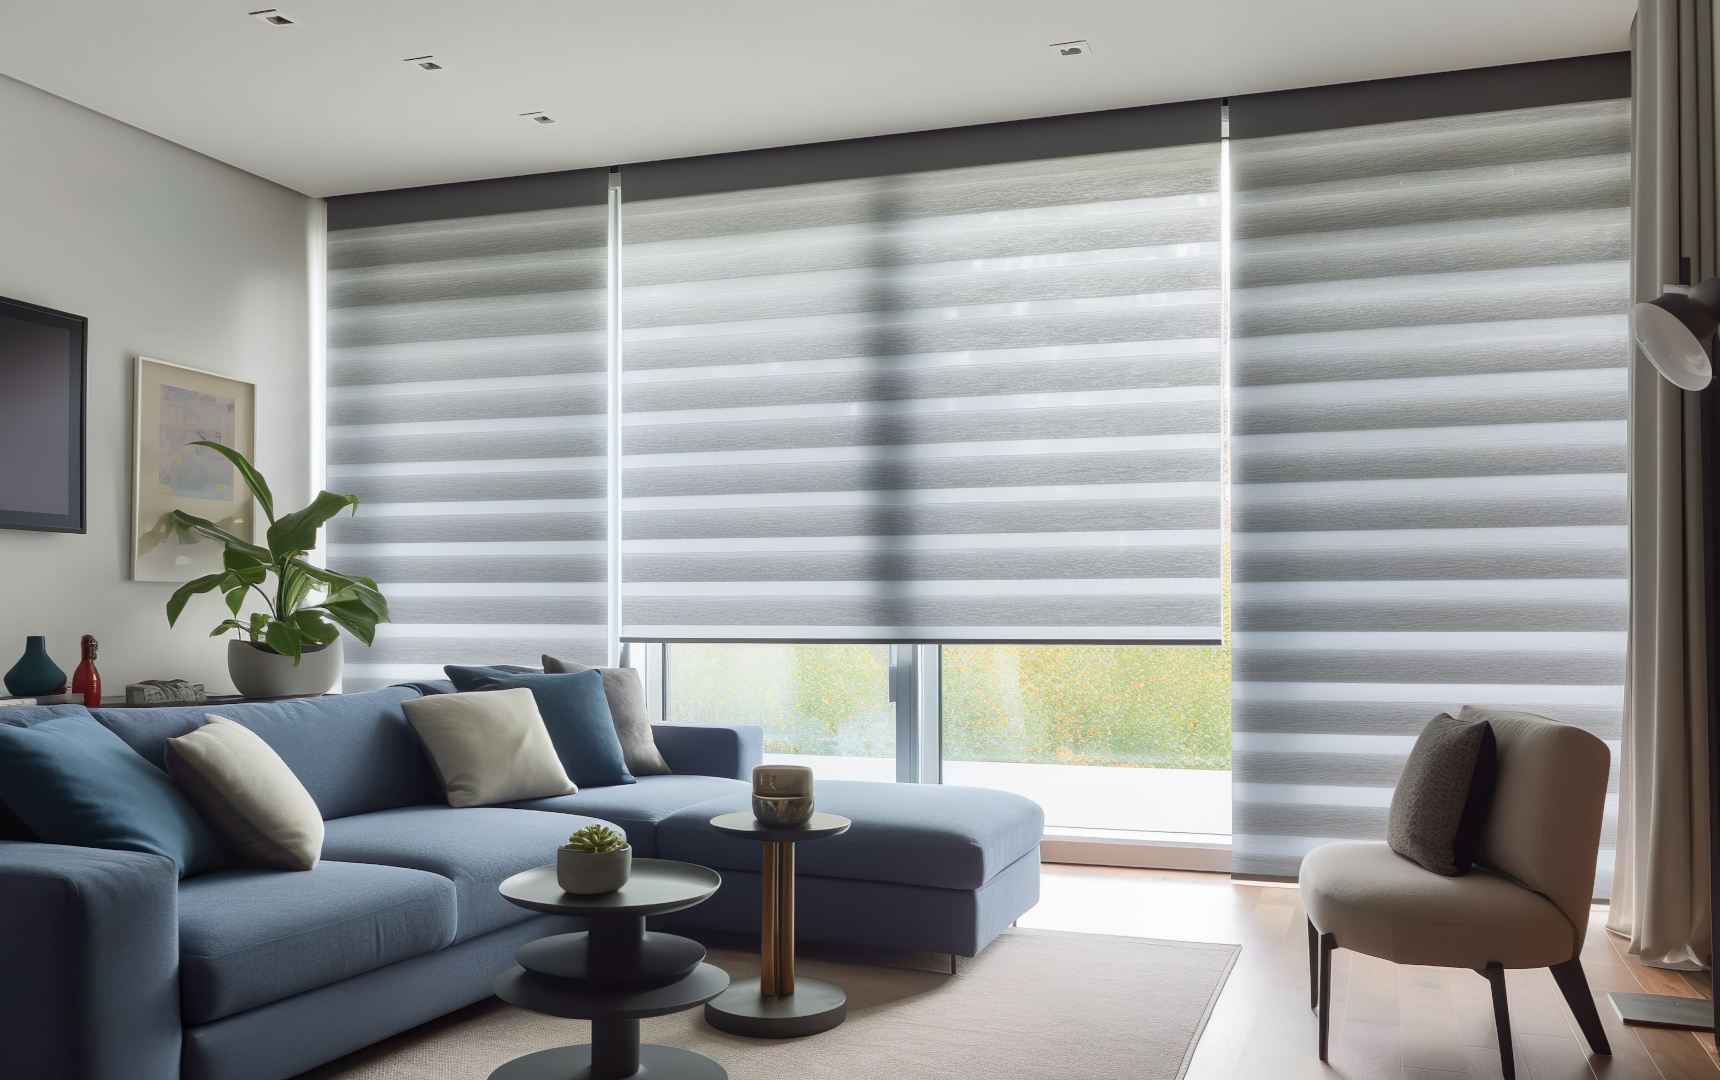 night and day blinds in a calm interior